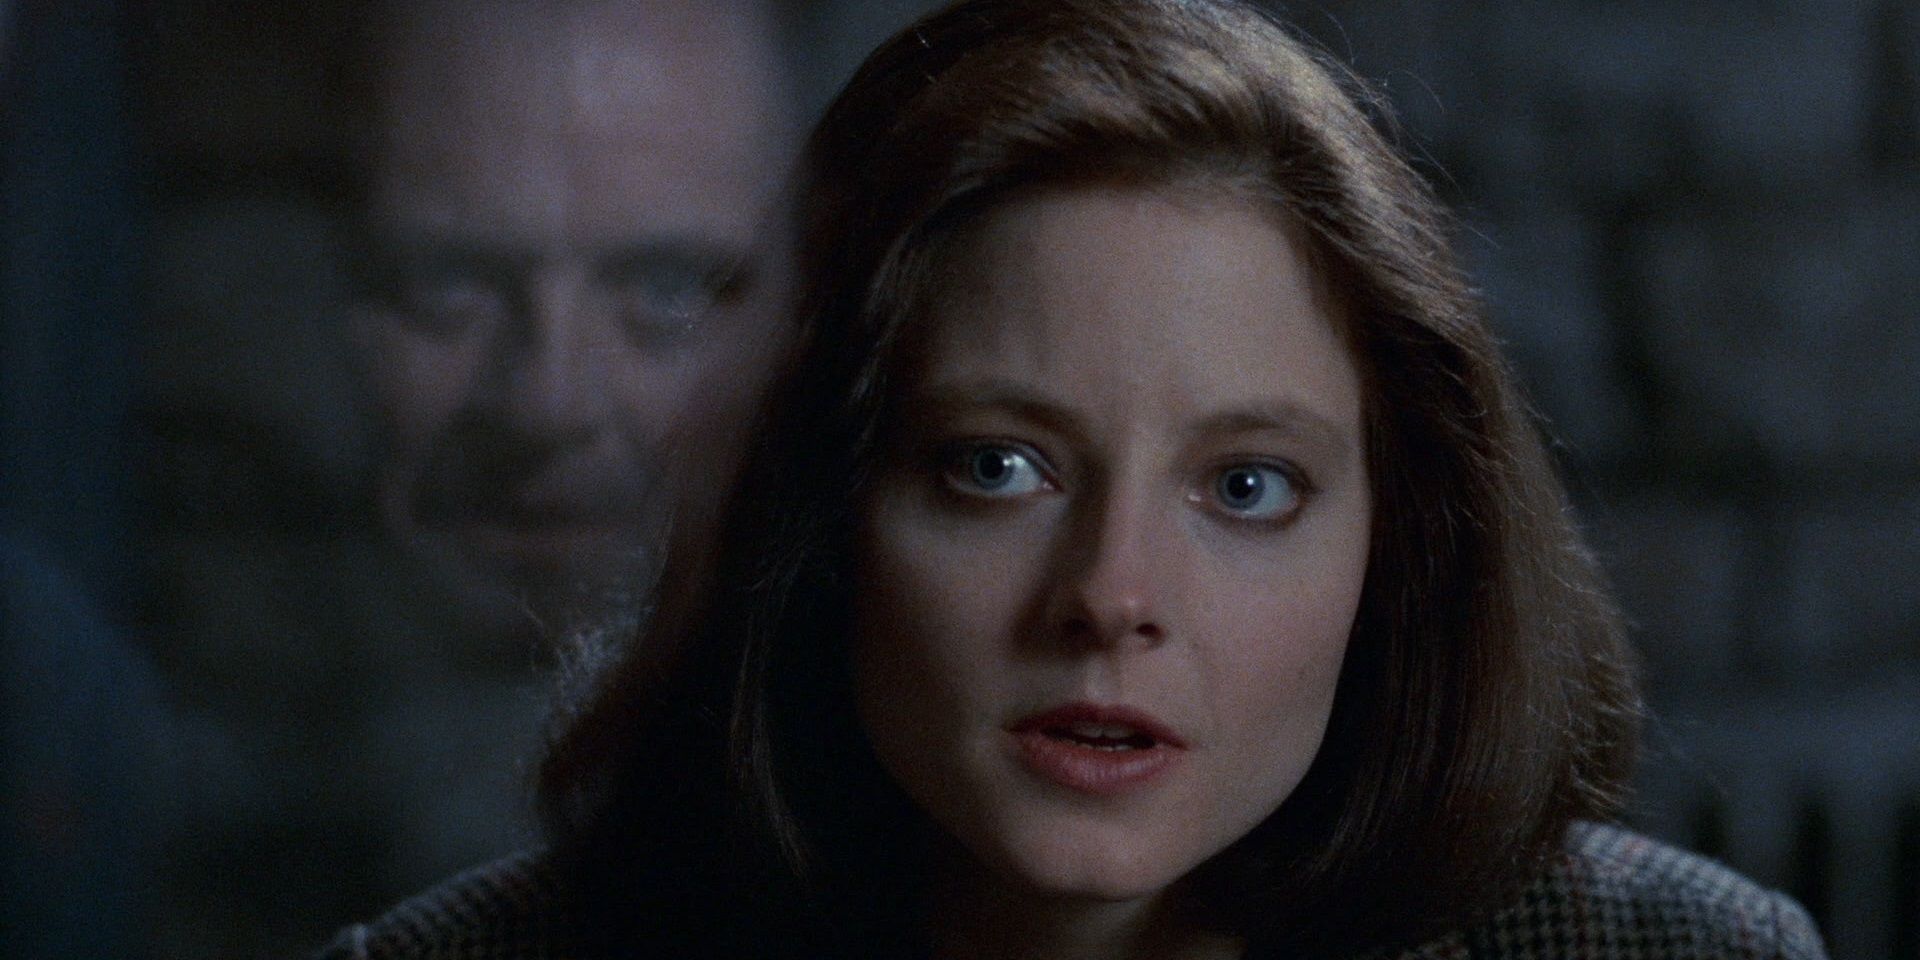 Jodie Foster looking intently at Anthony Hopkins in The Silence of the Lambs